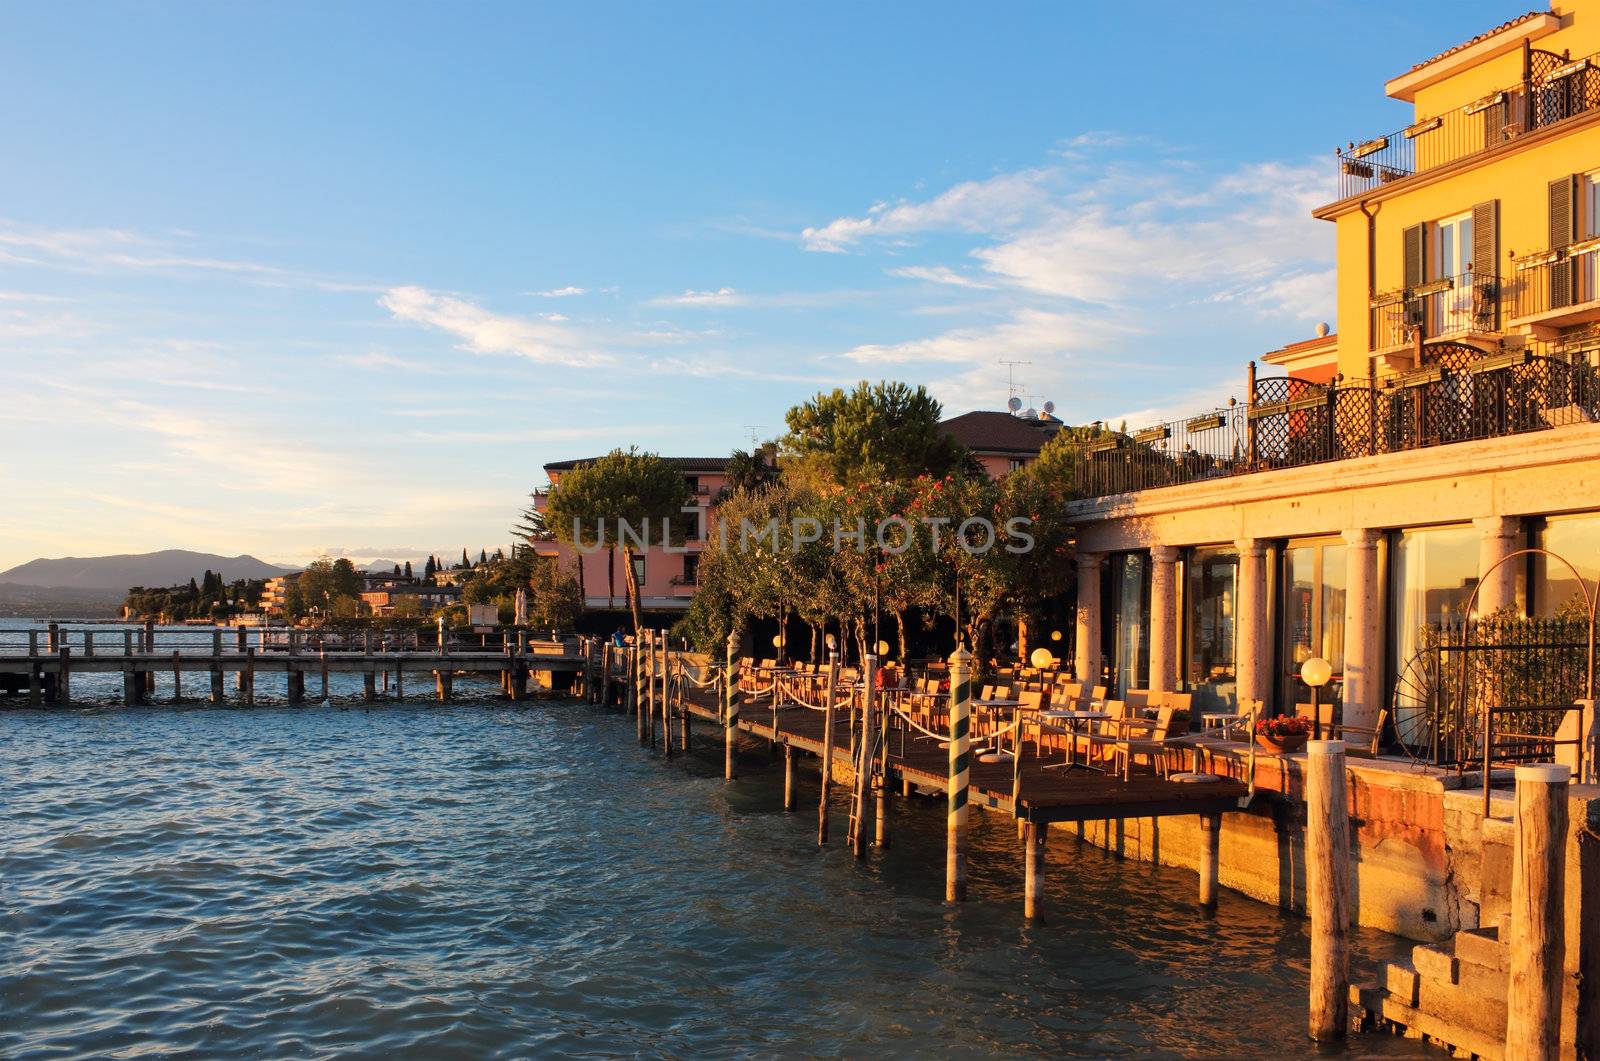 Jetty Port and Quay in Sirmione by kirilart